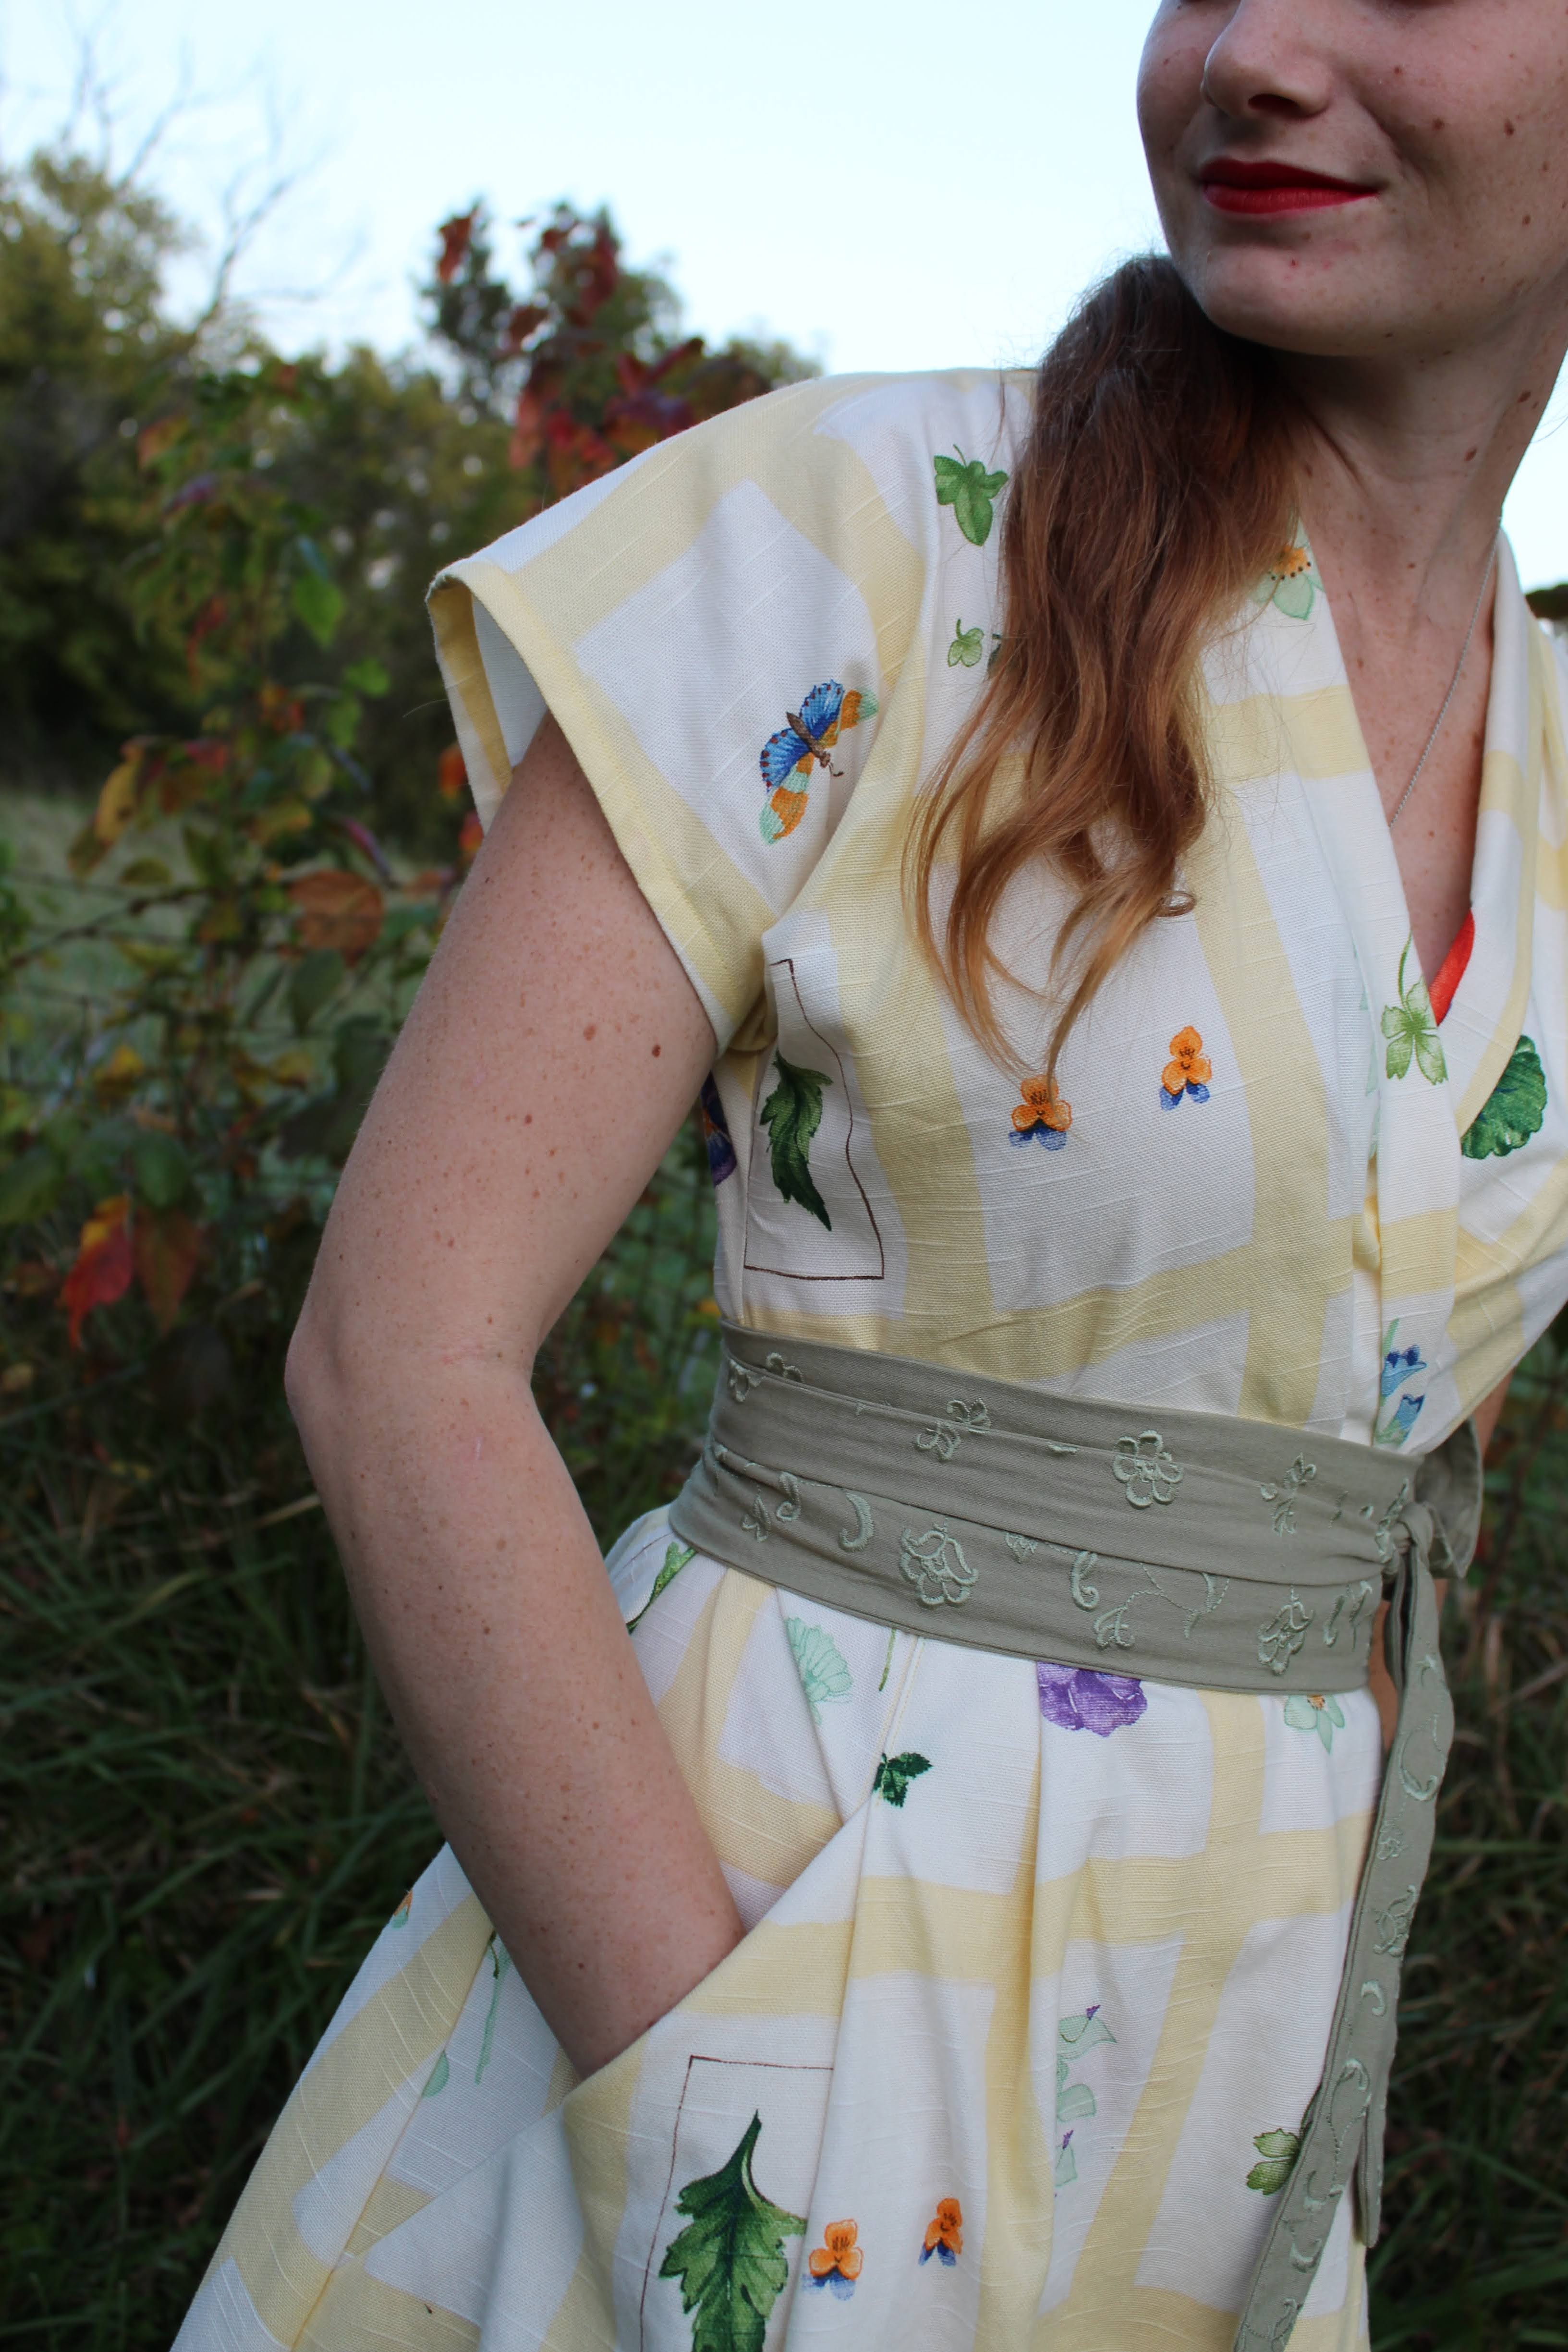 The Sewing Goatherd: The Wild, Wildwood, Curtain Wrap Dress